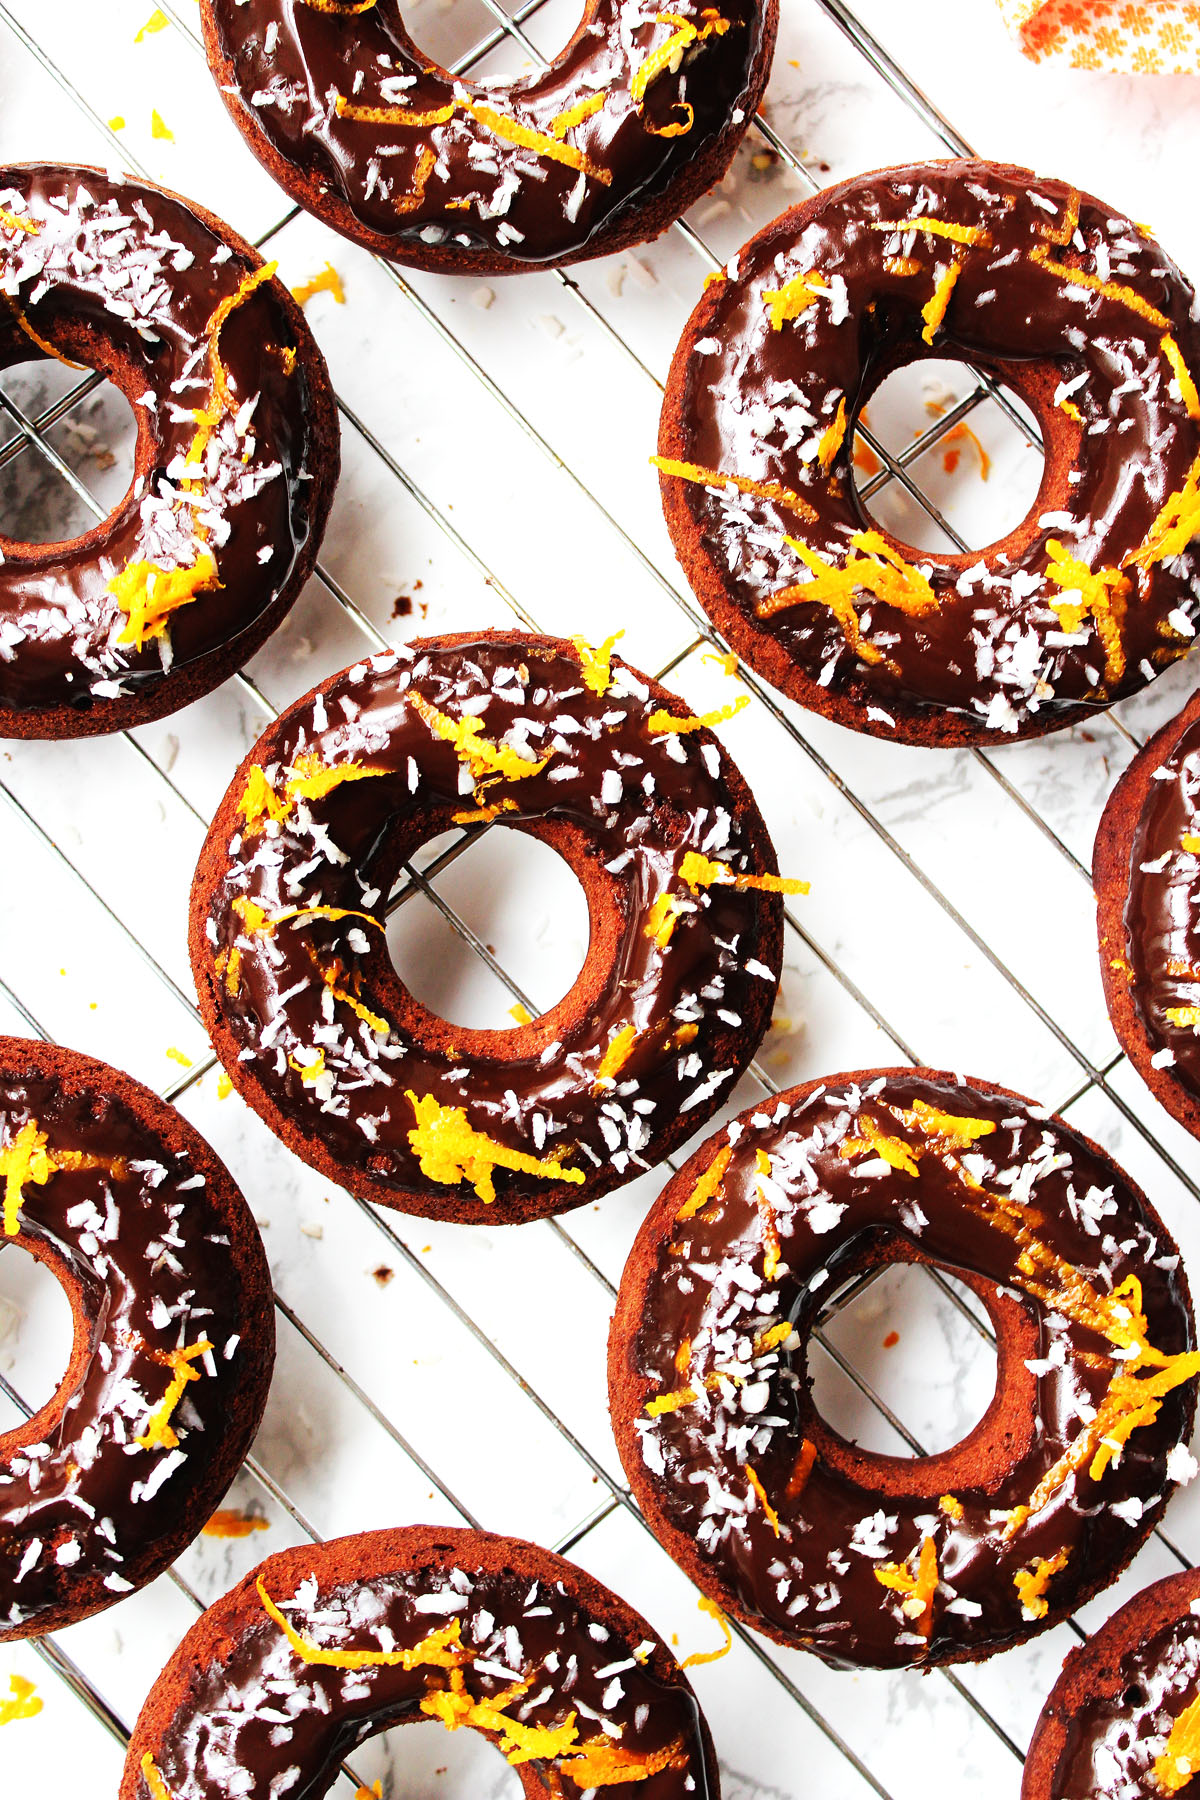 Baked Chocolate Orange and Coconut Doughnuts make a tasty afternoon snack, decadent breakfast or chocolatey treat just because. Get the recipe at Supper in the Suburbs